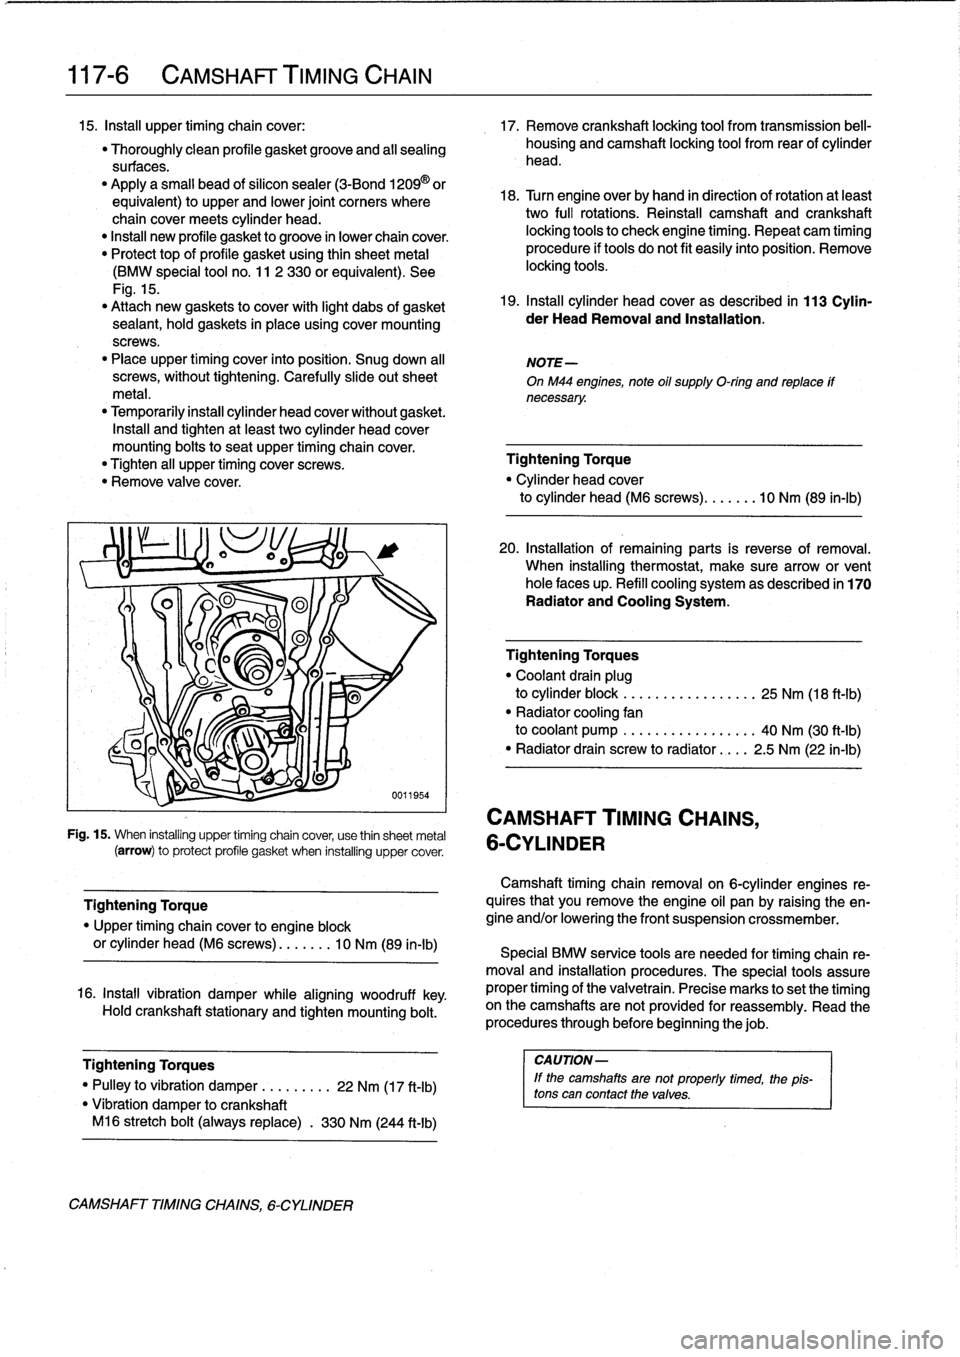 BMW 323i 1997 E36 Workshop Manual 
117-
6

	

CAMSHAFT
TIMING
CHAIN

15
.
Insta¡¡
upper
timing
chaincover
:

	

17
.
Remove
crankshaft
locking
tool
from
transmission
bell-

"
Thoroughly
clean
profile
gasketgroove
and
all
sealing

	
